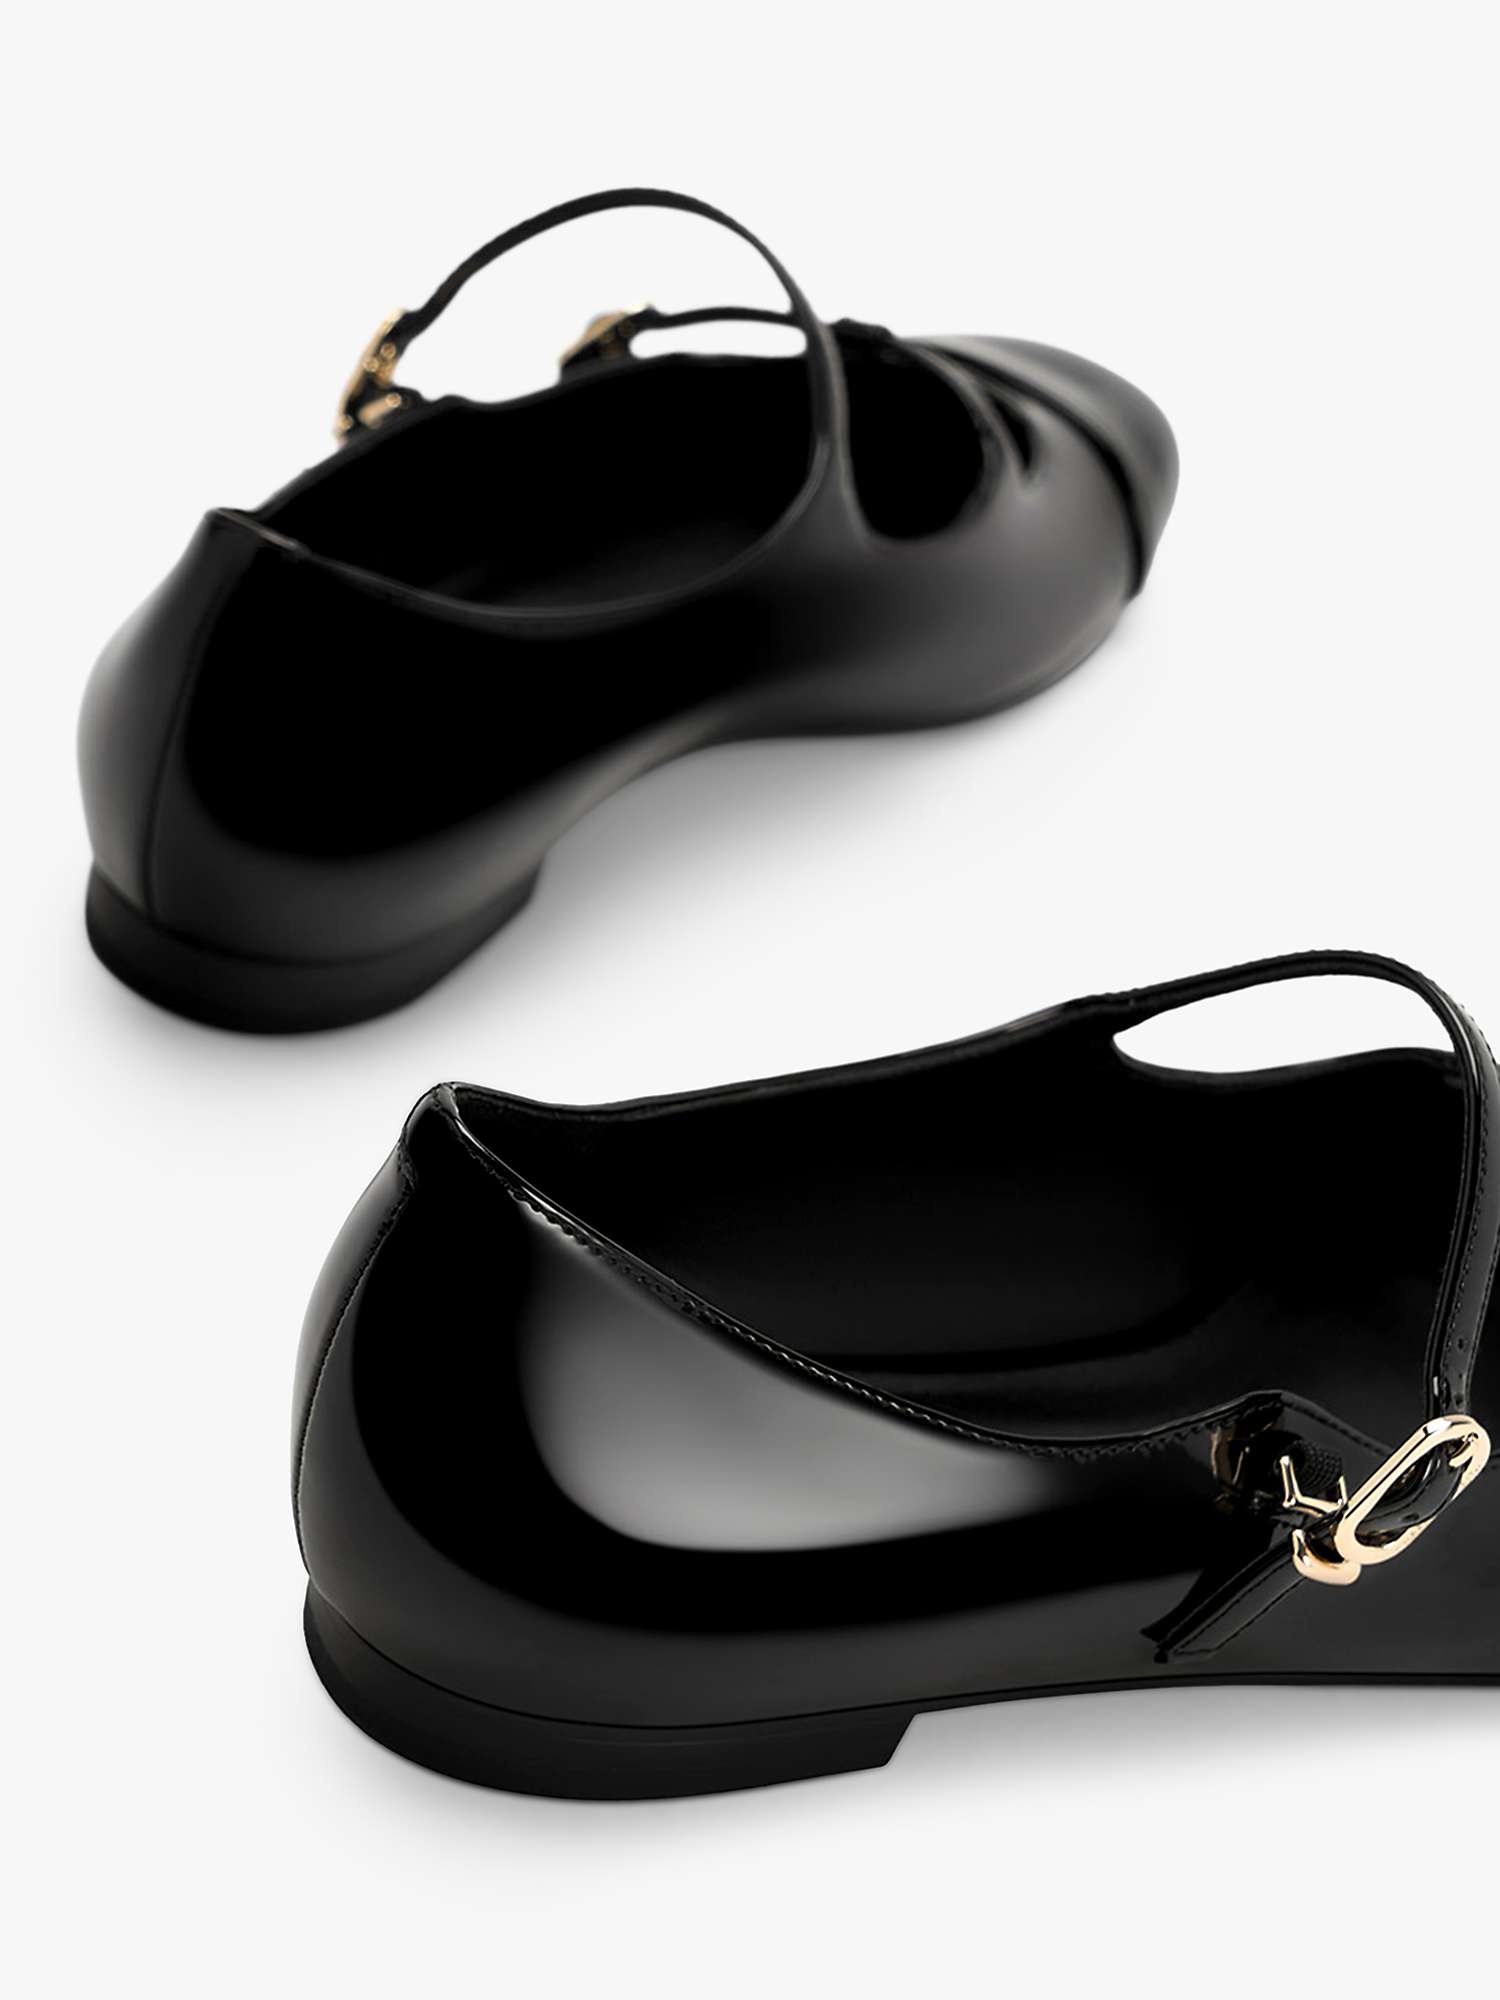 Buy CHARLES & KEITH Double Strap Mary Janes, Black Box Online at johnlewis.com